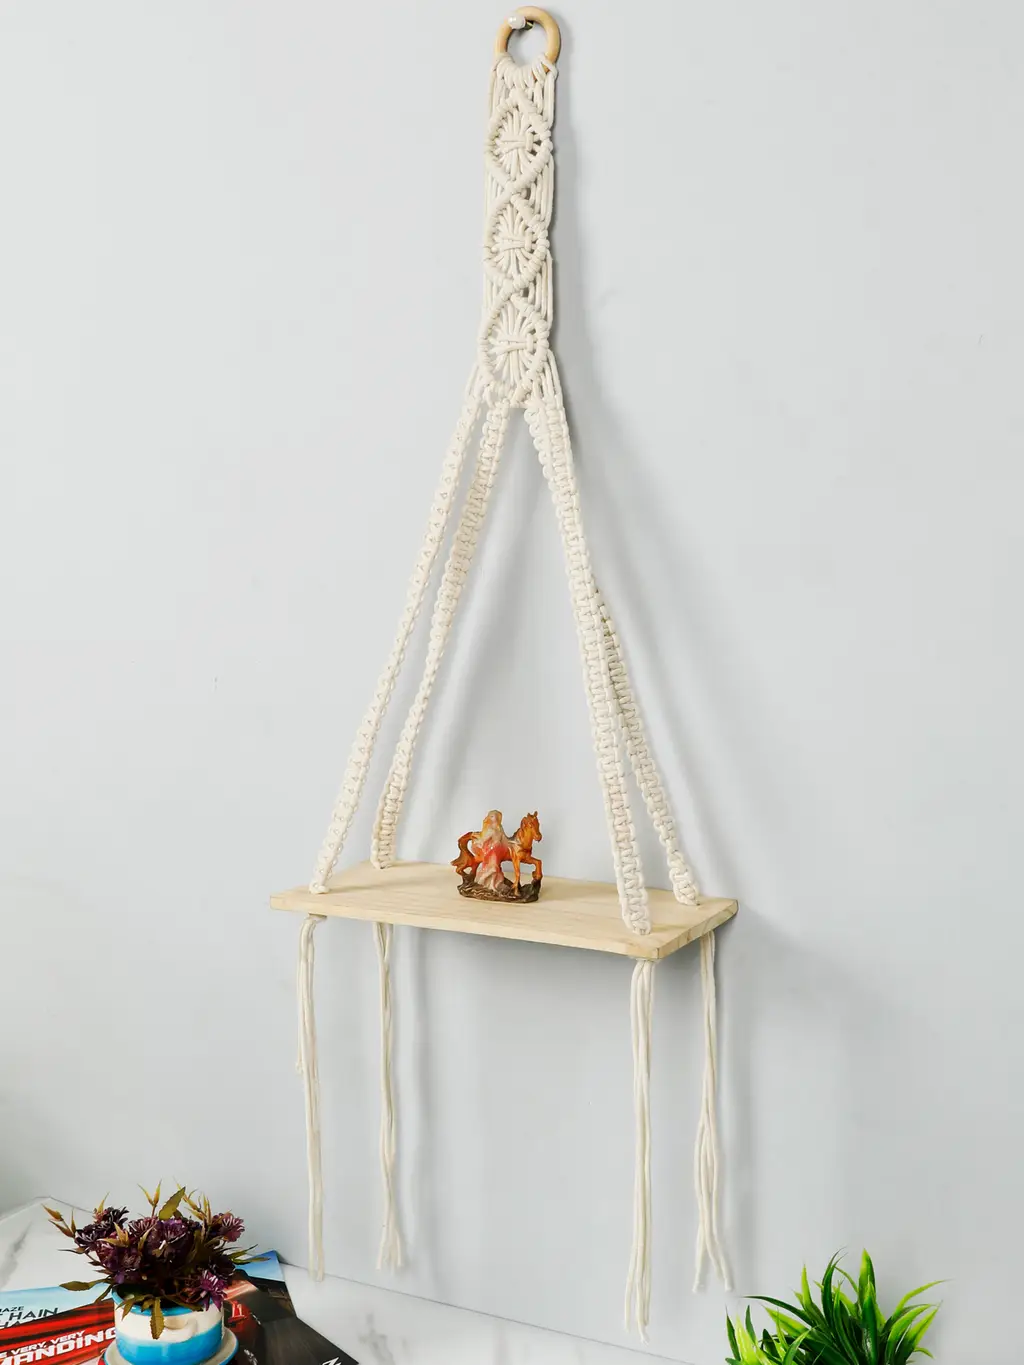 Macrame Wall hanging shelf, small knot support, 12x5, off-white